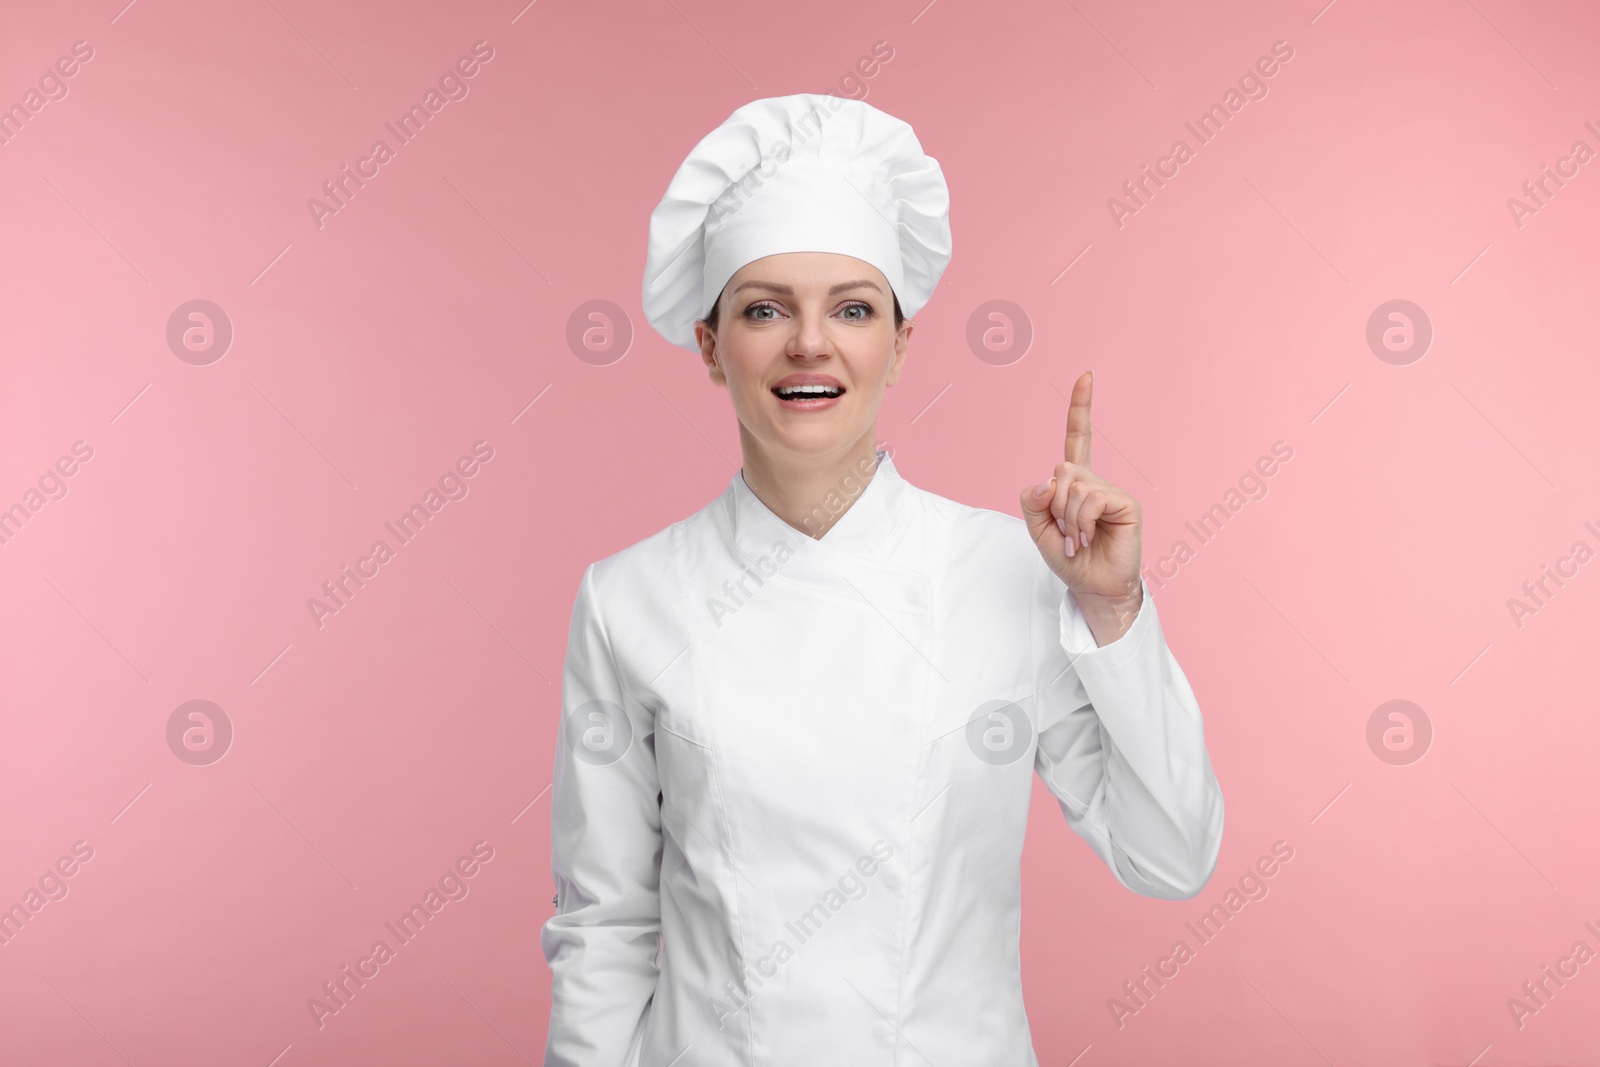 Photo of Happy chef in uniform pointing at something on pink background